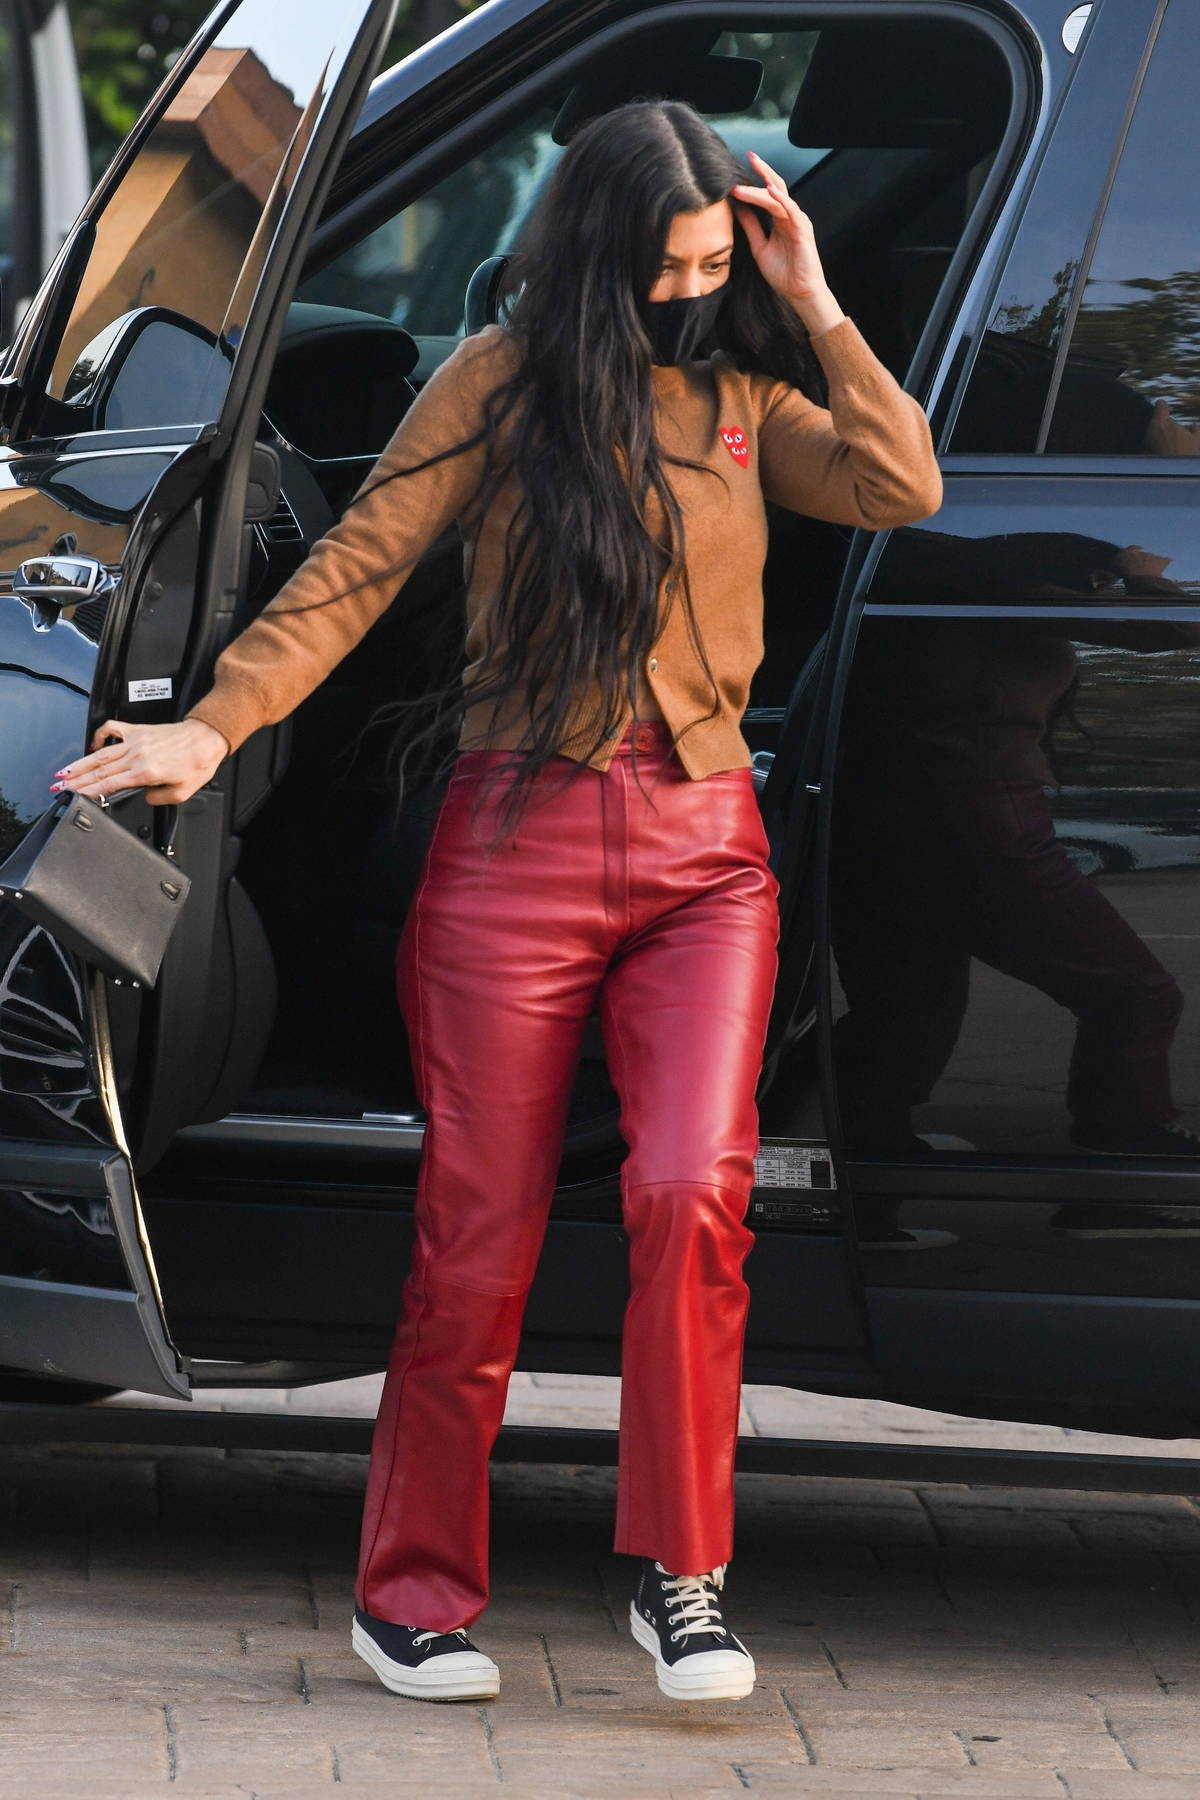 Kourtney Kardashian steps out wearing red leather pants as she grabs dinner  with friends at Nobu